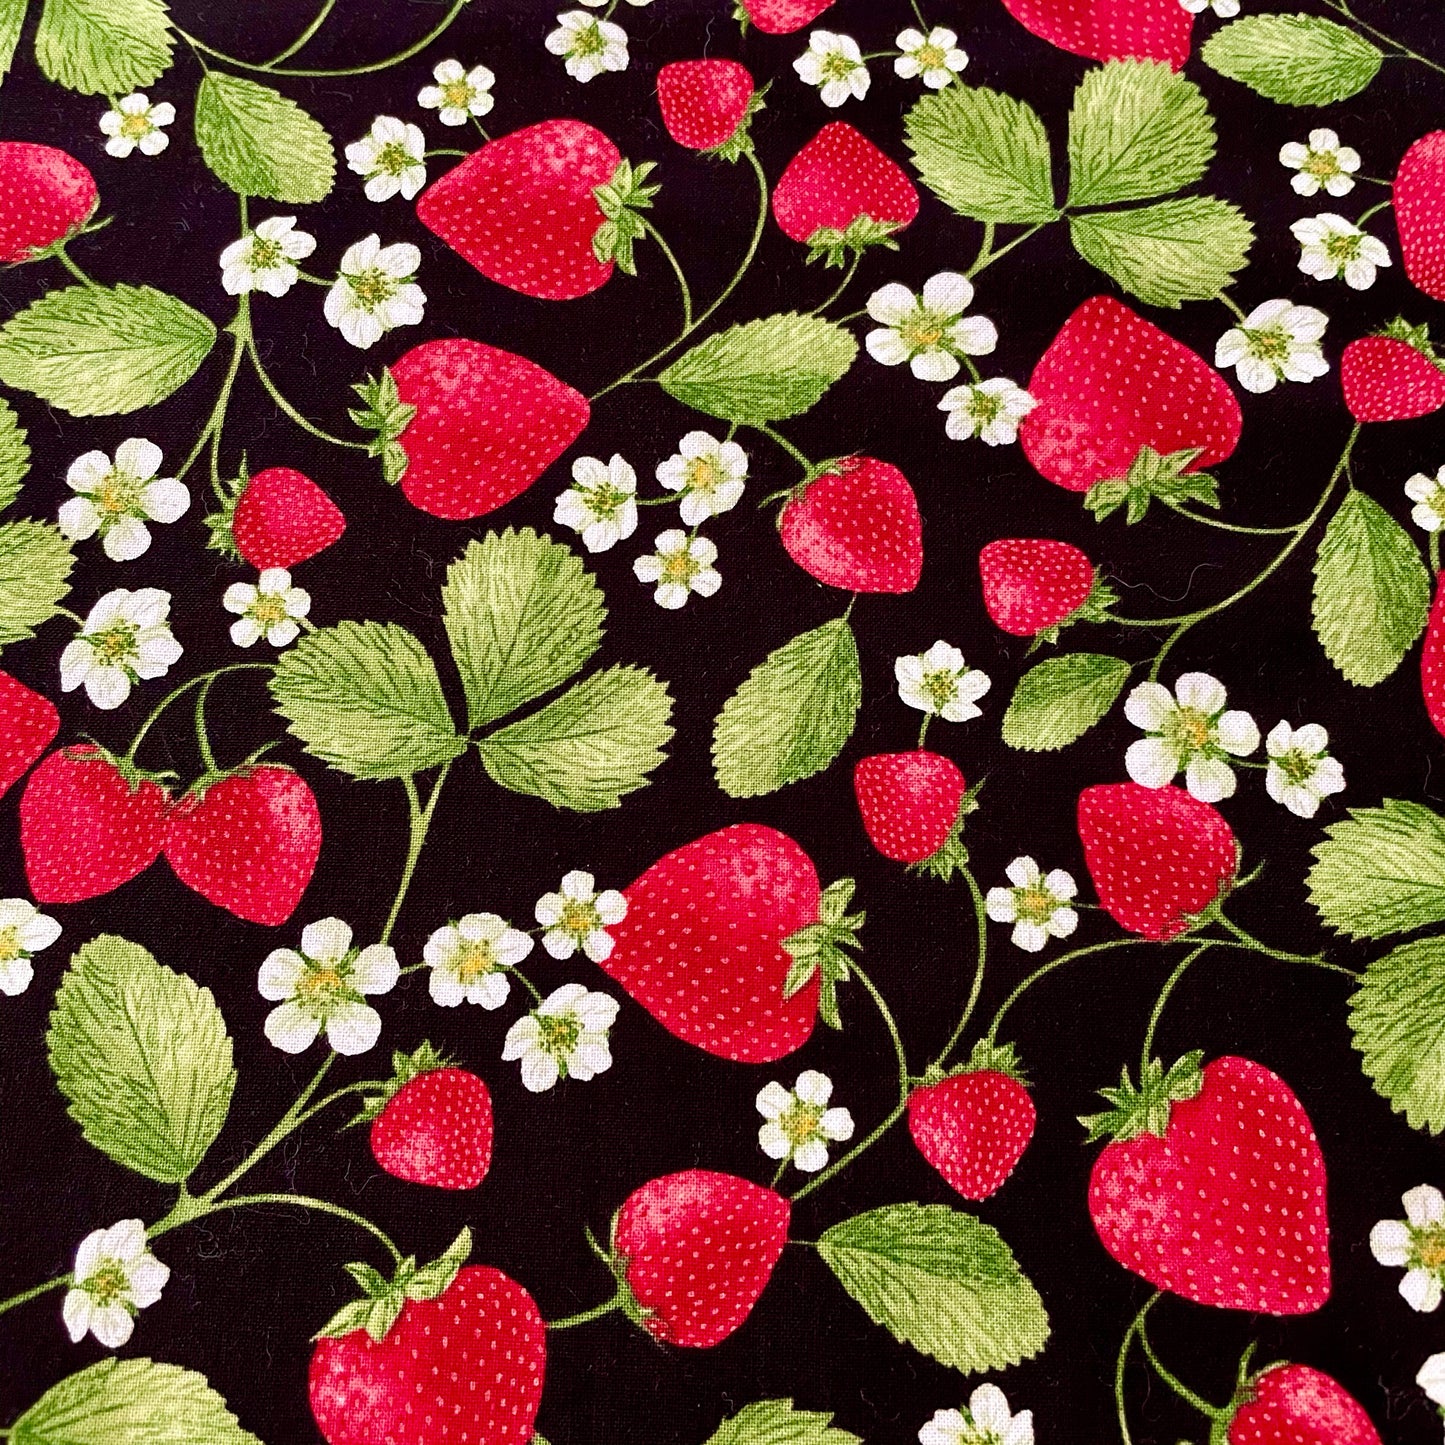 Strawberries and Vines fabric by Timeless Treasures